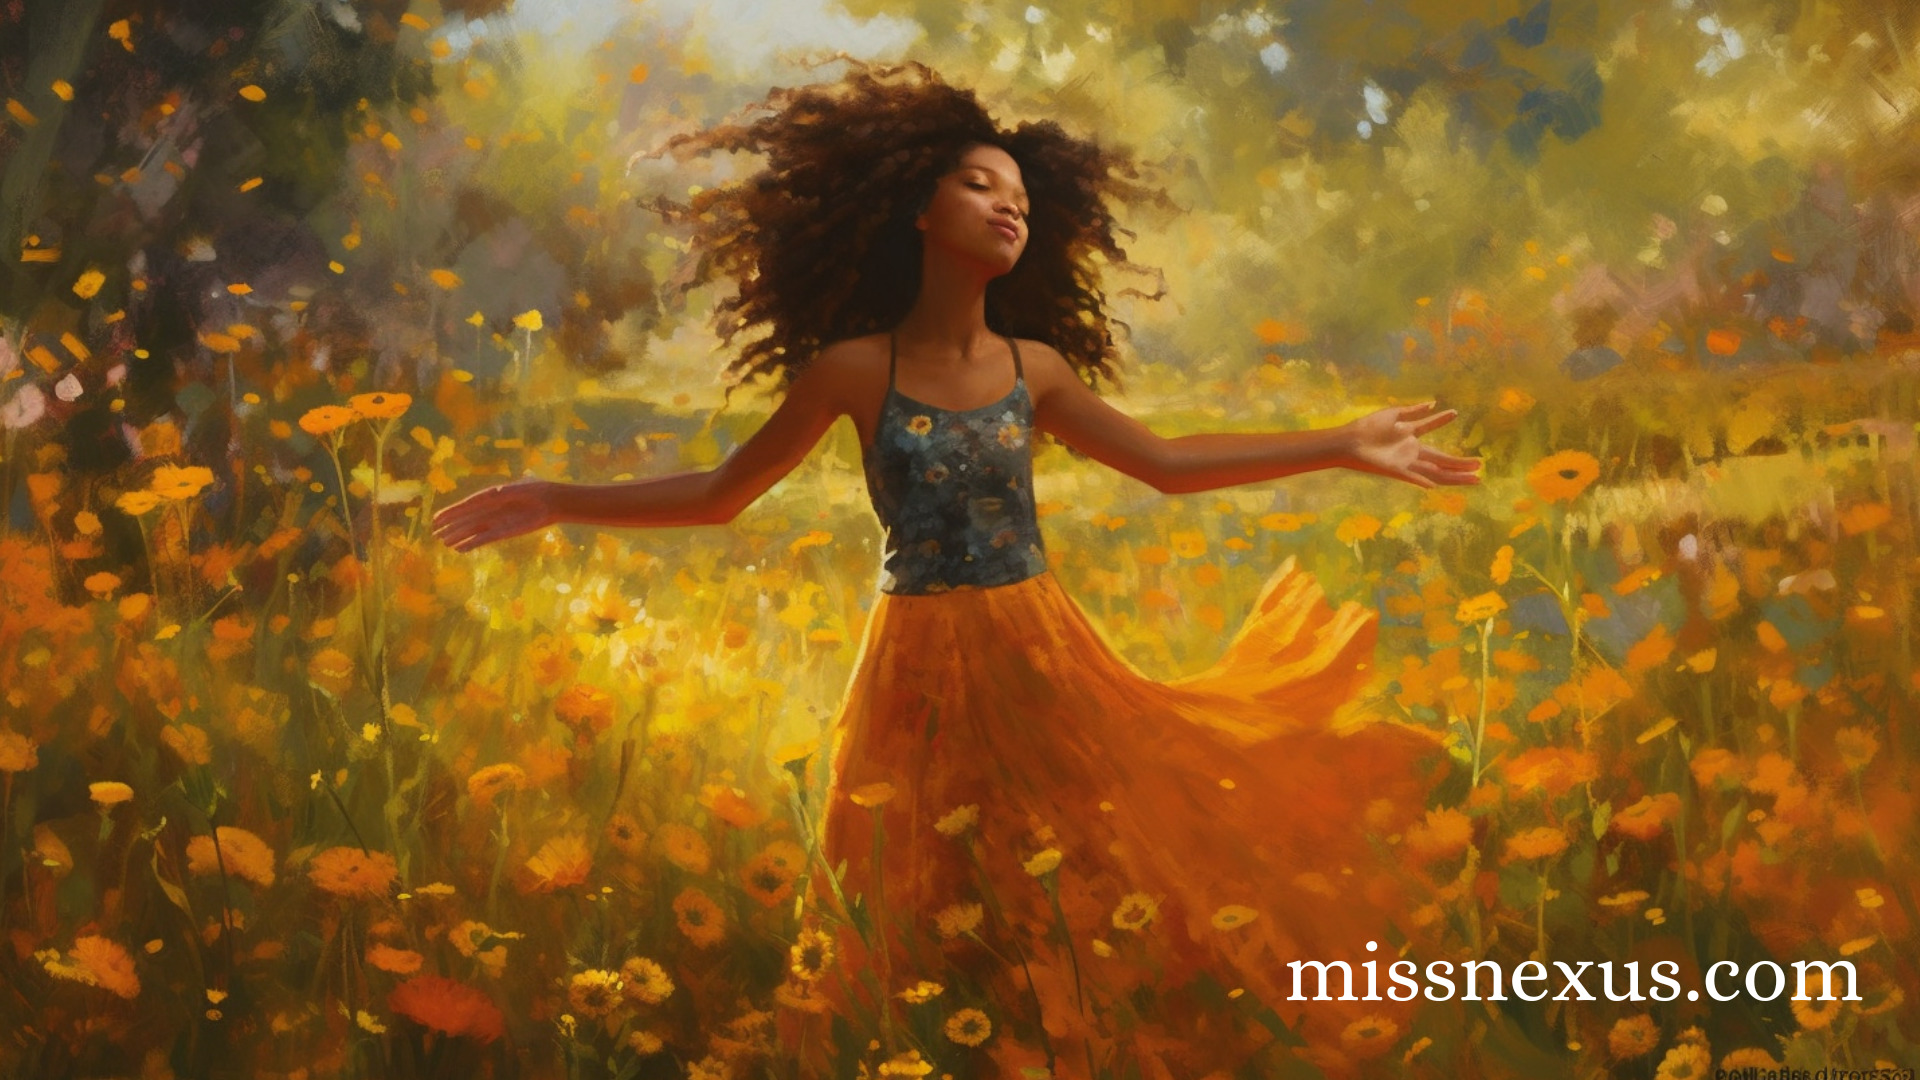 In the midst of a sun-kissed meadow, a young Black girl with curly, vibrant hair dances joyfully under the radiant embrace of the golden rays. Her eyes sparkle with an enchanting light, mirroring the infinite possibilities that dance within her soul. She is adorned in a whimsical dress, the colors of the rainbow weaving together in a tapestry of magic and self-expression. With arms outstretched and a wide smile painted across her face, she twirls effortlessly, her feet barely touching the ground. Every movement she makes echoes with a sense of liberation and authenticity. As she spins, a trail of glittery stardust follows her, illuminating the path she traverses, revealing her innate power and the vibrant energy she radiates. In her dance, she embodies the strength and resilience that arise from honoring her boundaries and embracing her true self. It's a moment frozen in time, capturing the essence of her inner child's playful spirit and the boundless wonder that flows through her.